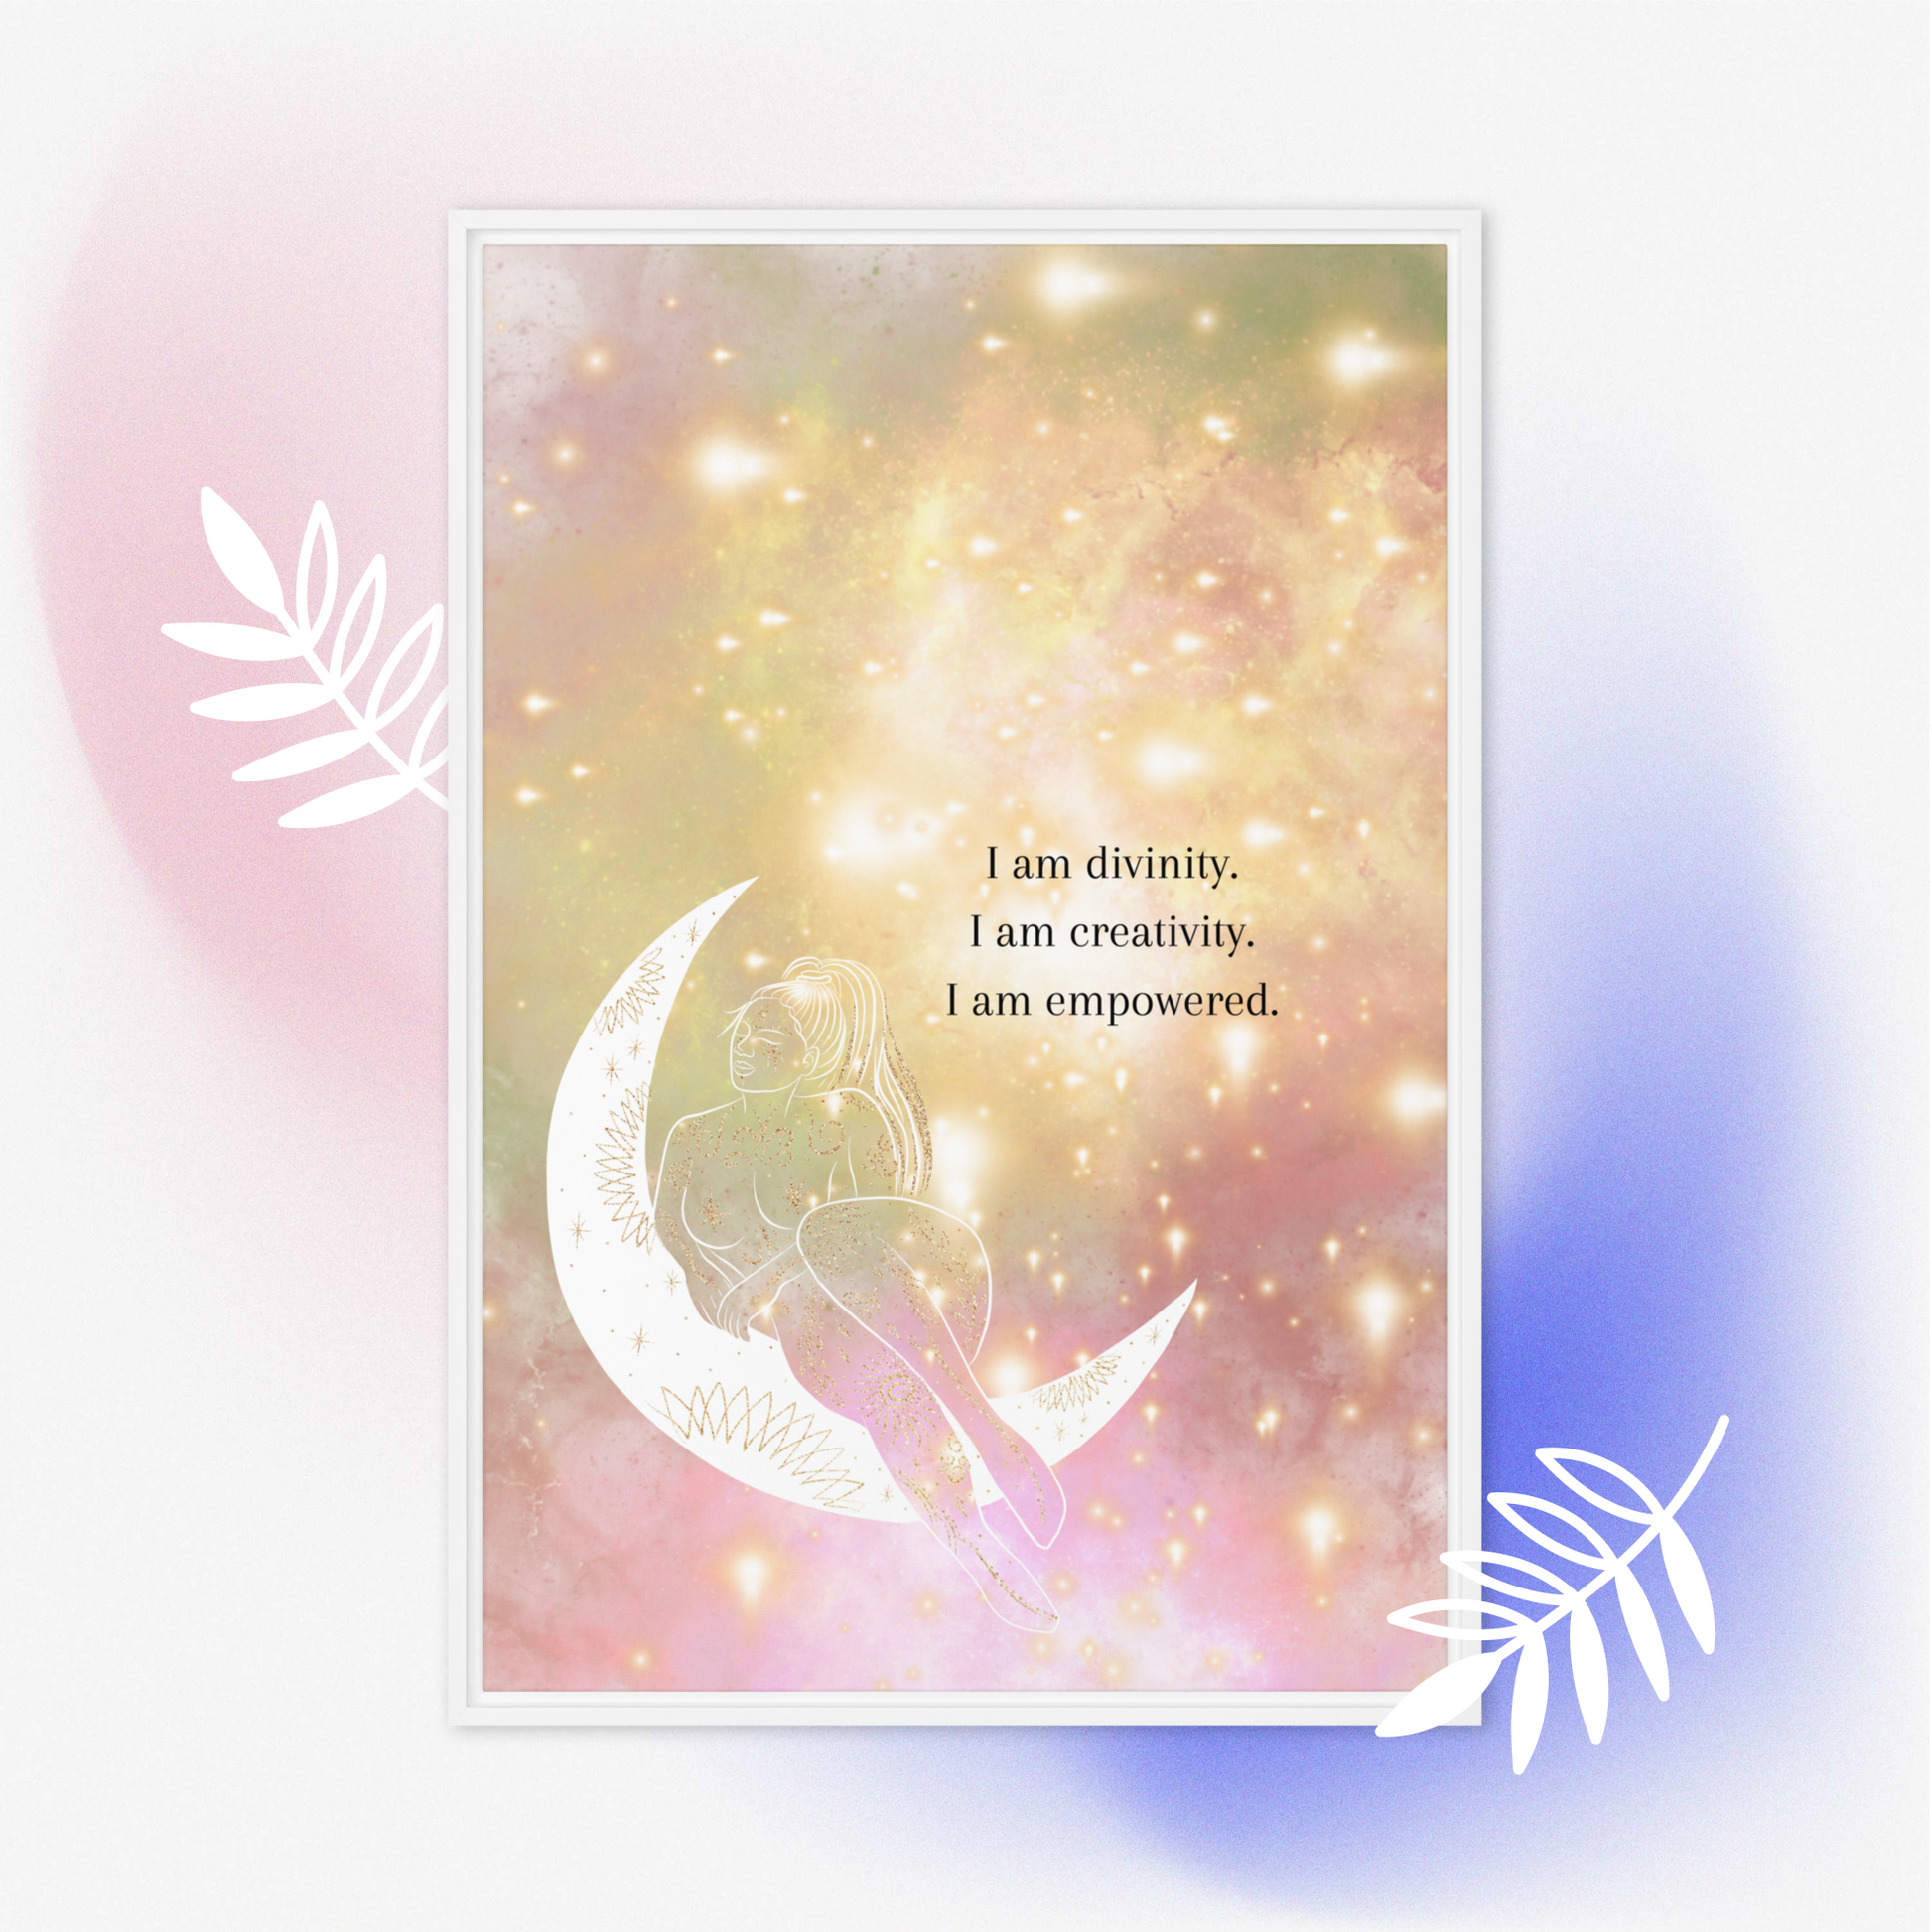 A Confidence Manifestation Affirmation Printable Wall Art featuring the moon and leaves, perfect for affirmations.